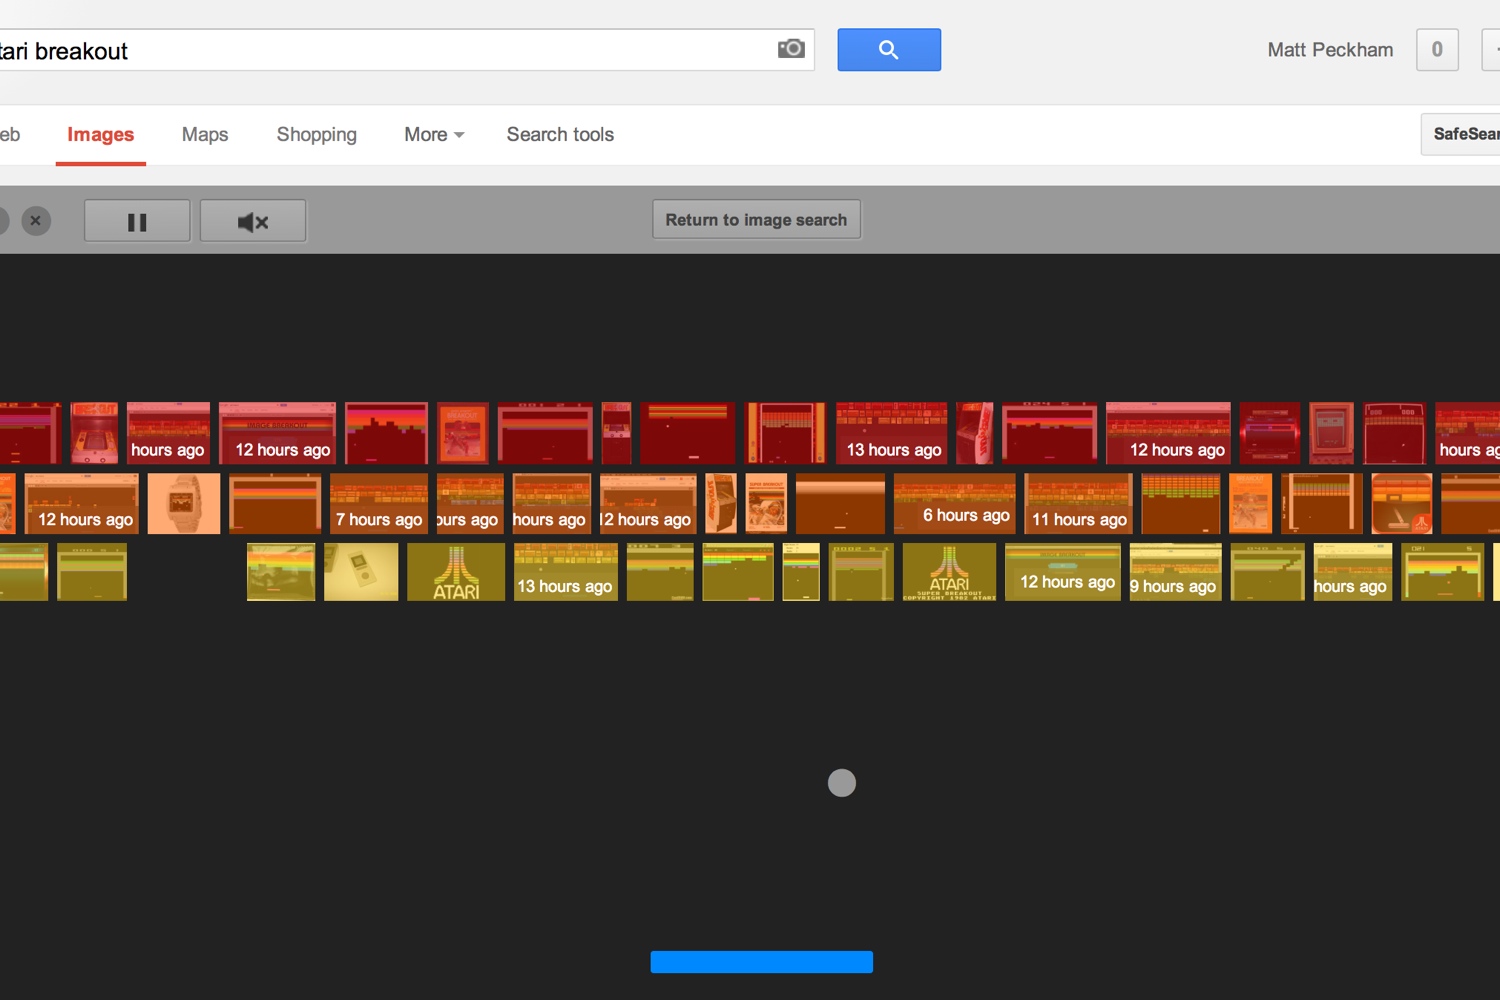 Google Lets You 'Breakout' of Image Search with Retro Atari Easter Egg